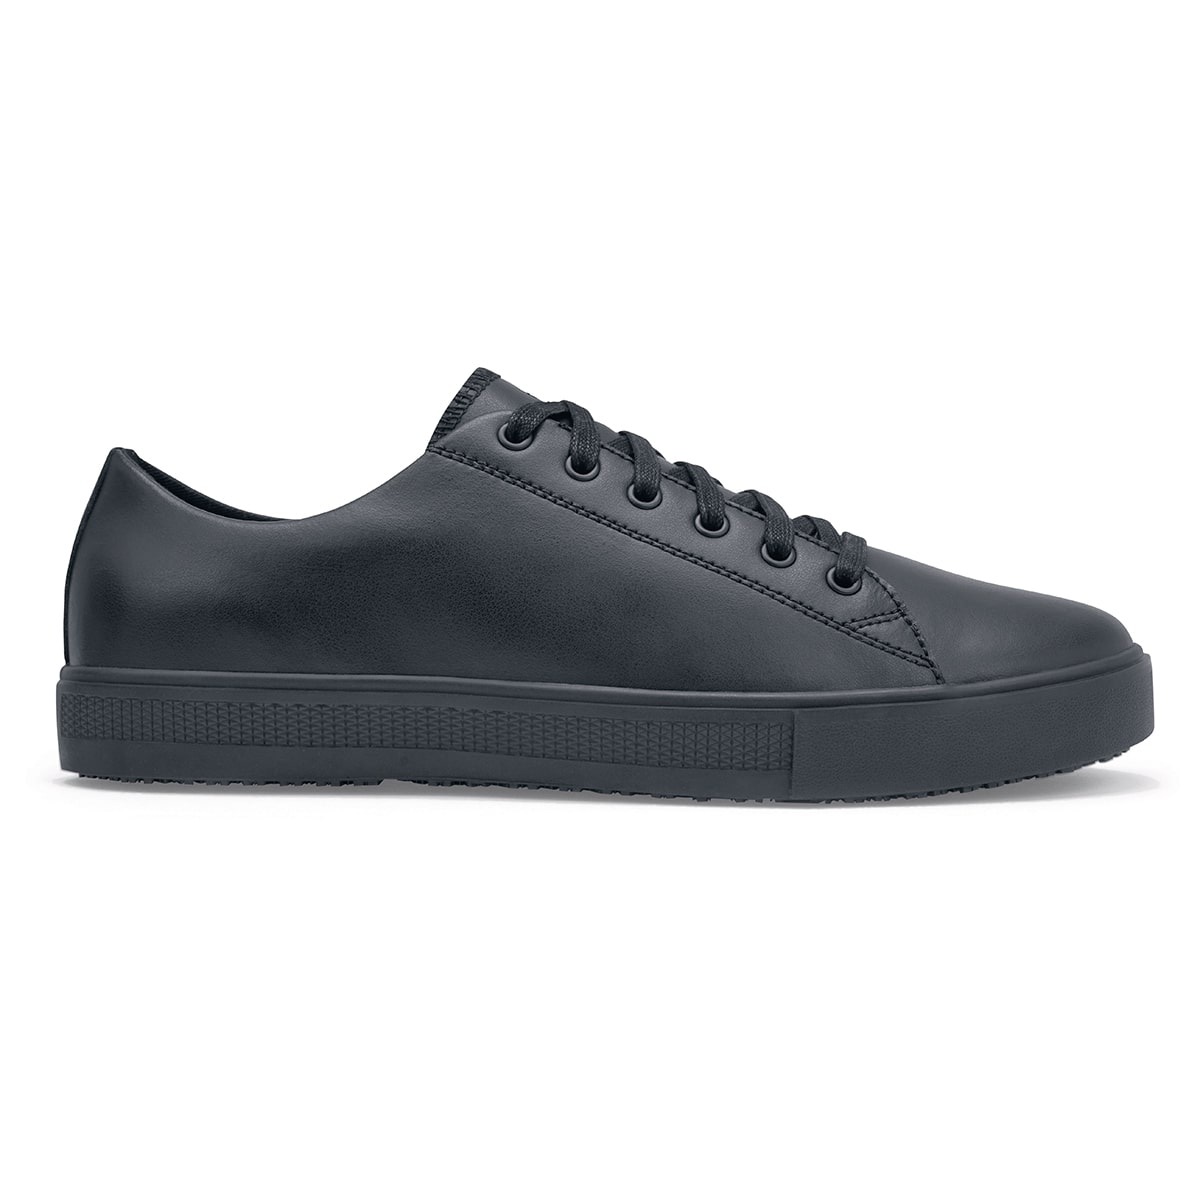 The Old School Low-Rider from Shoes For Crews is an slip-resistant lace-up shoe designed to provide comfort throughout the day, seen from the right.